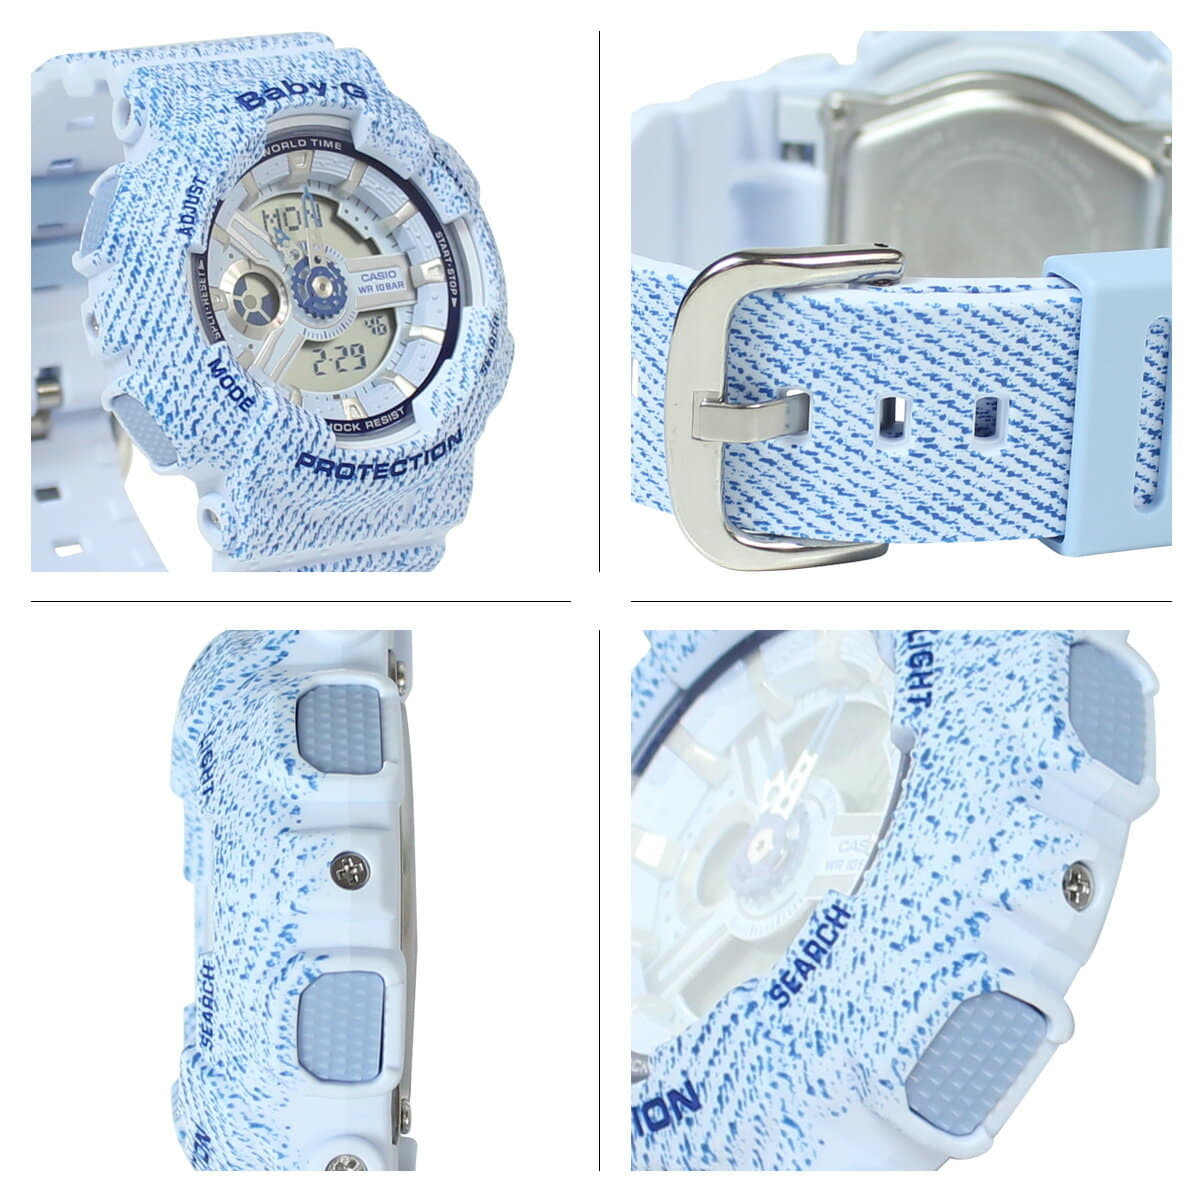 New]CASIO BABY-G Casio watch BA-110DC-2A3JF DENIMD COLOR baby G G- shock  Lady's - BE FORWARD Store